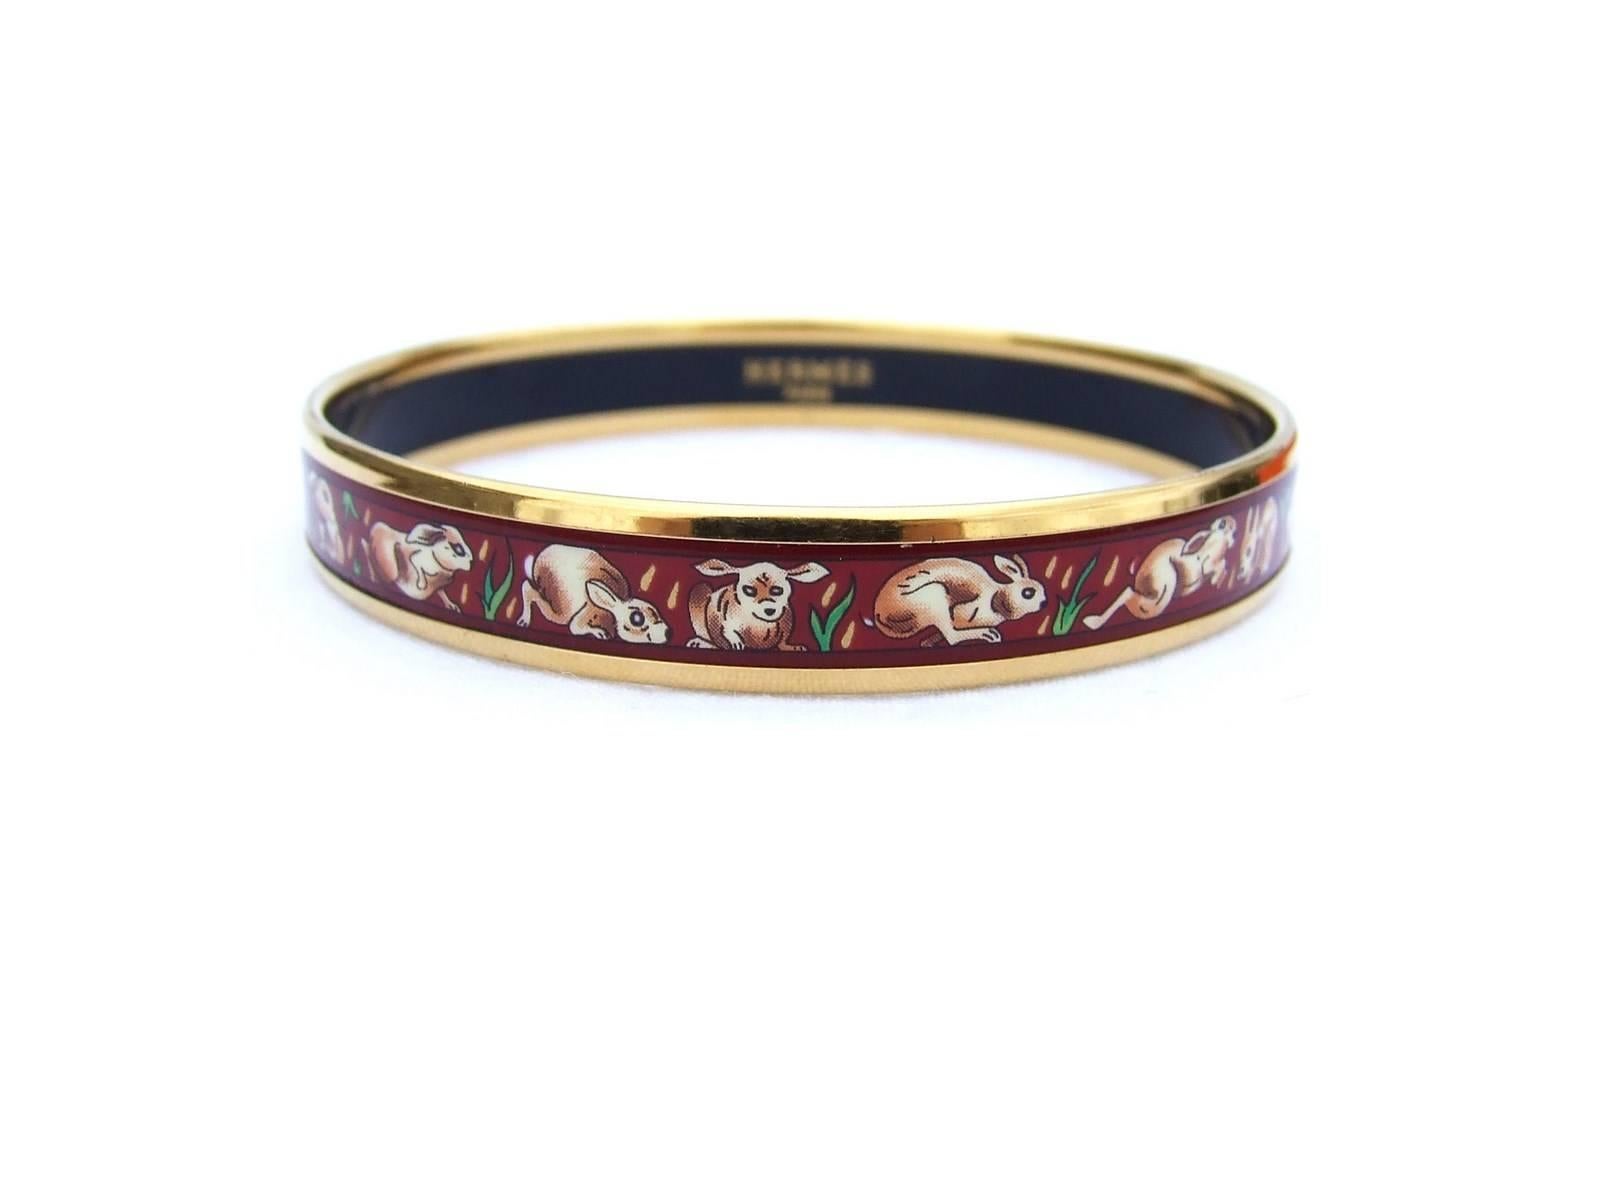 SO CUTE AUTHENTIC HERMES BRACELET

Pattern: Rabbits in the grass

Made in Austria + C

Made of Printed Enamel and Gold Plated Hardware

Colorway: Deep red background, Beige and Brown Rabbits, Green Grass

